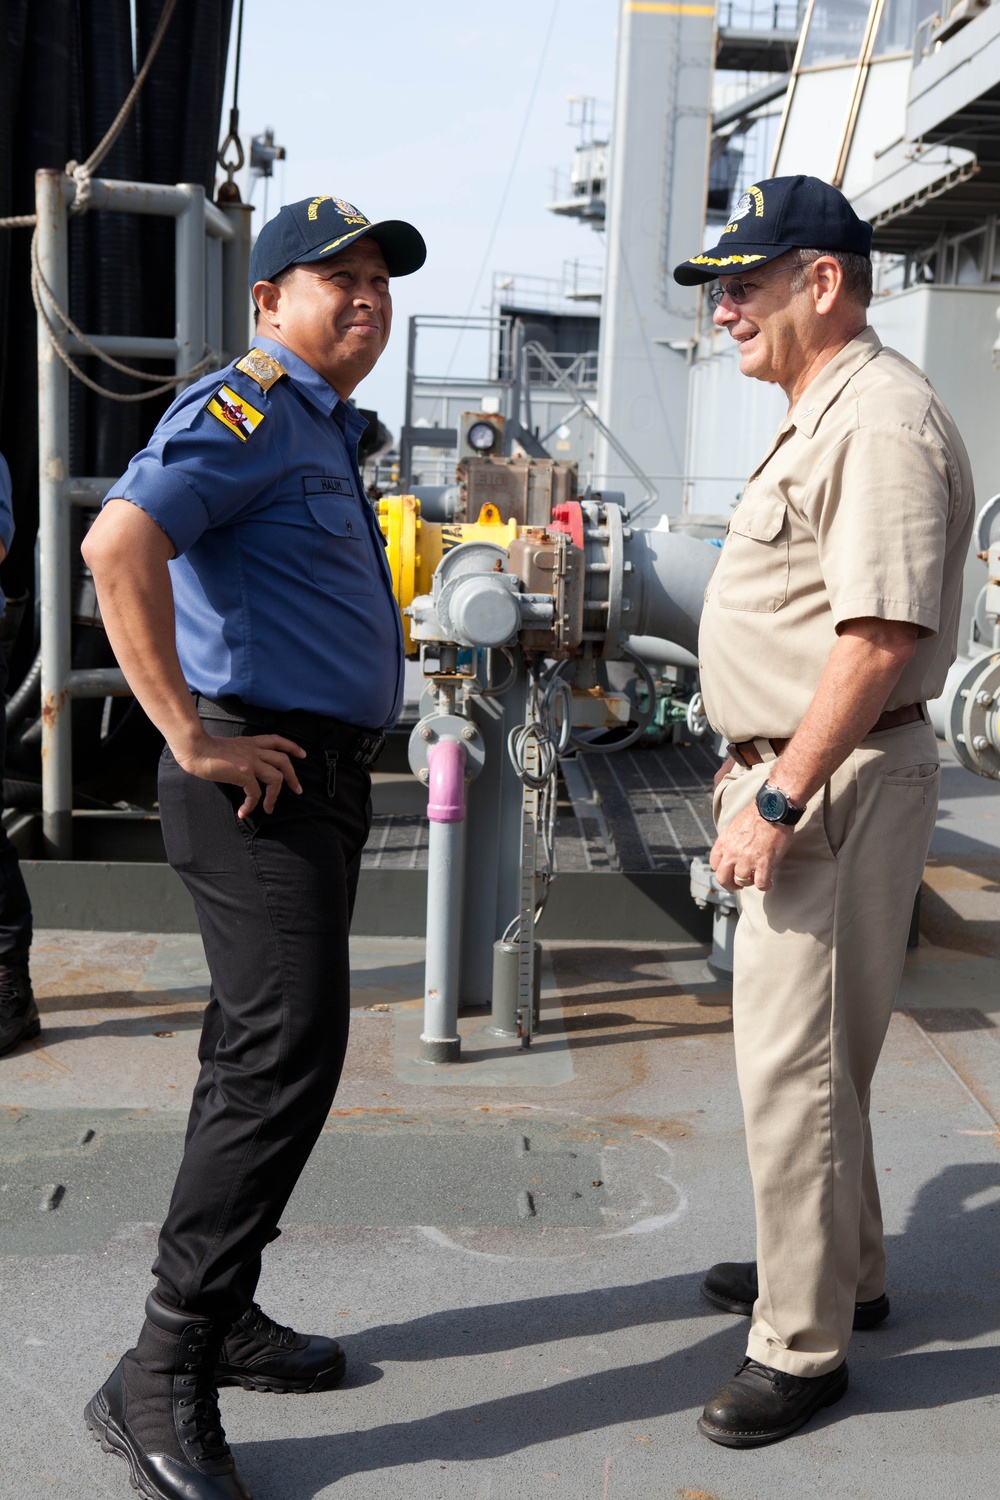 Royal Brunei Navy Commander comes aboard the USNS Matthew Perry